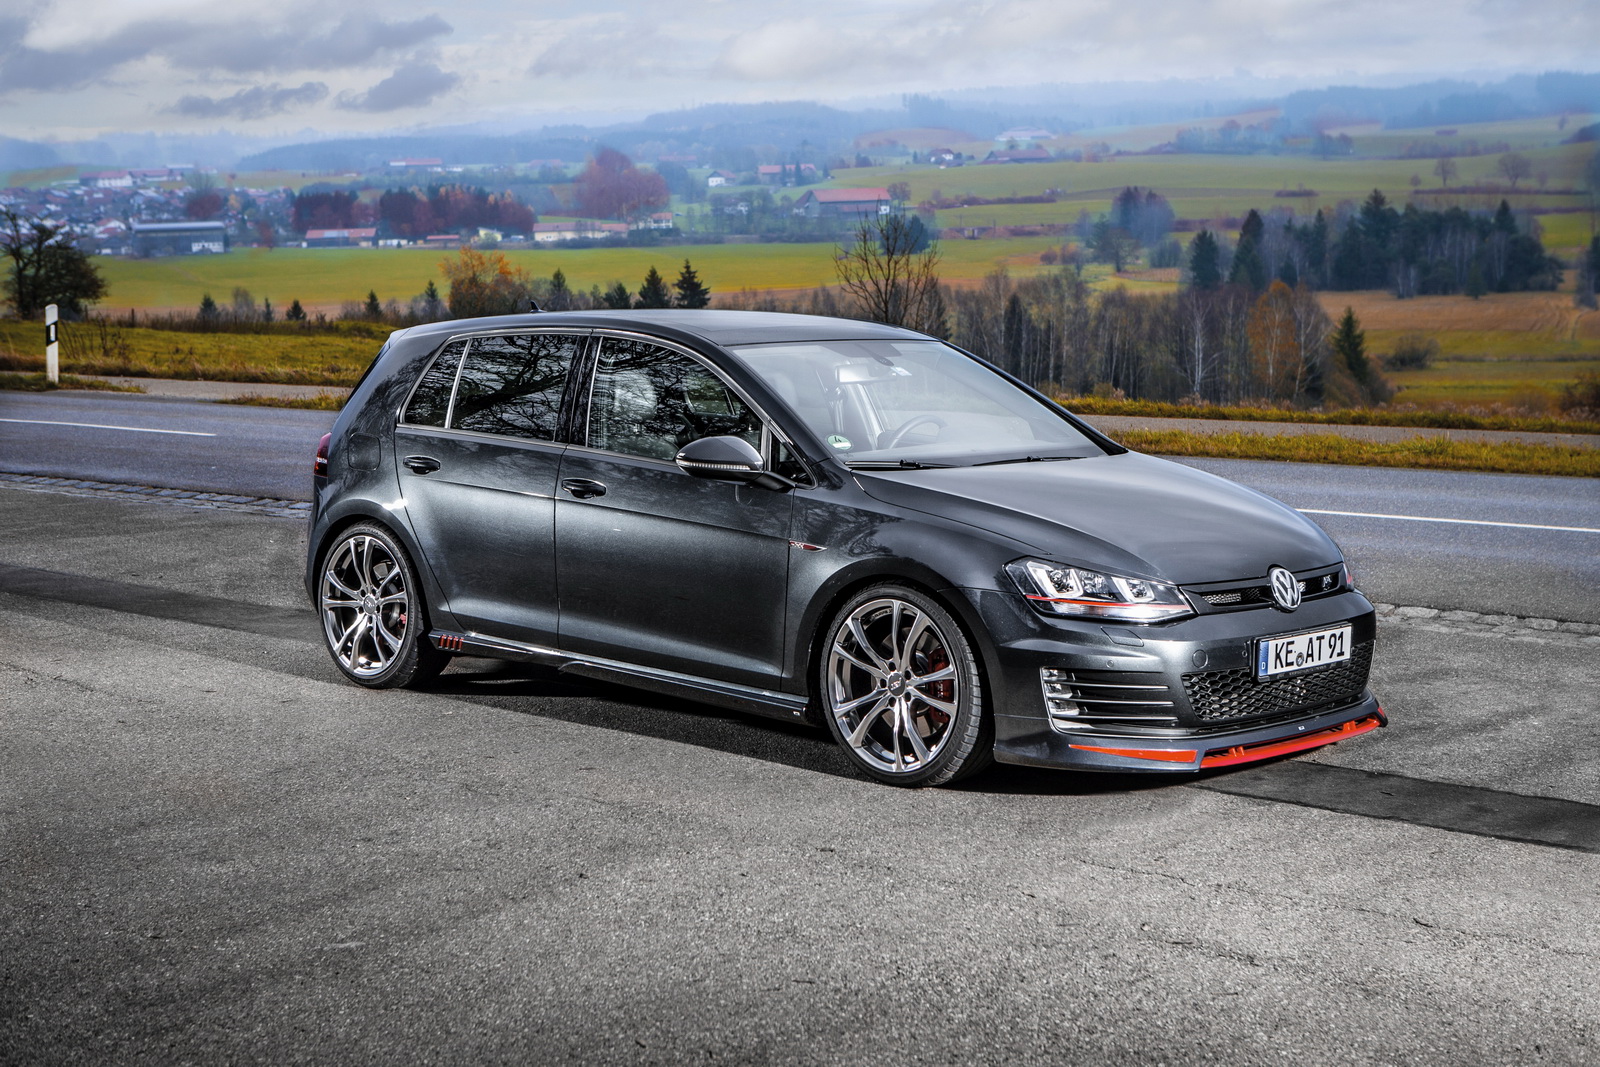 The new ABT Golf VII GTD – a great top diesel - Audi Tuning, VW